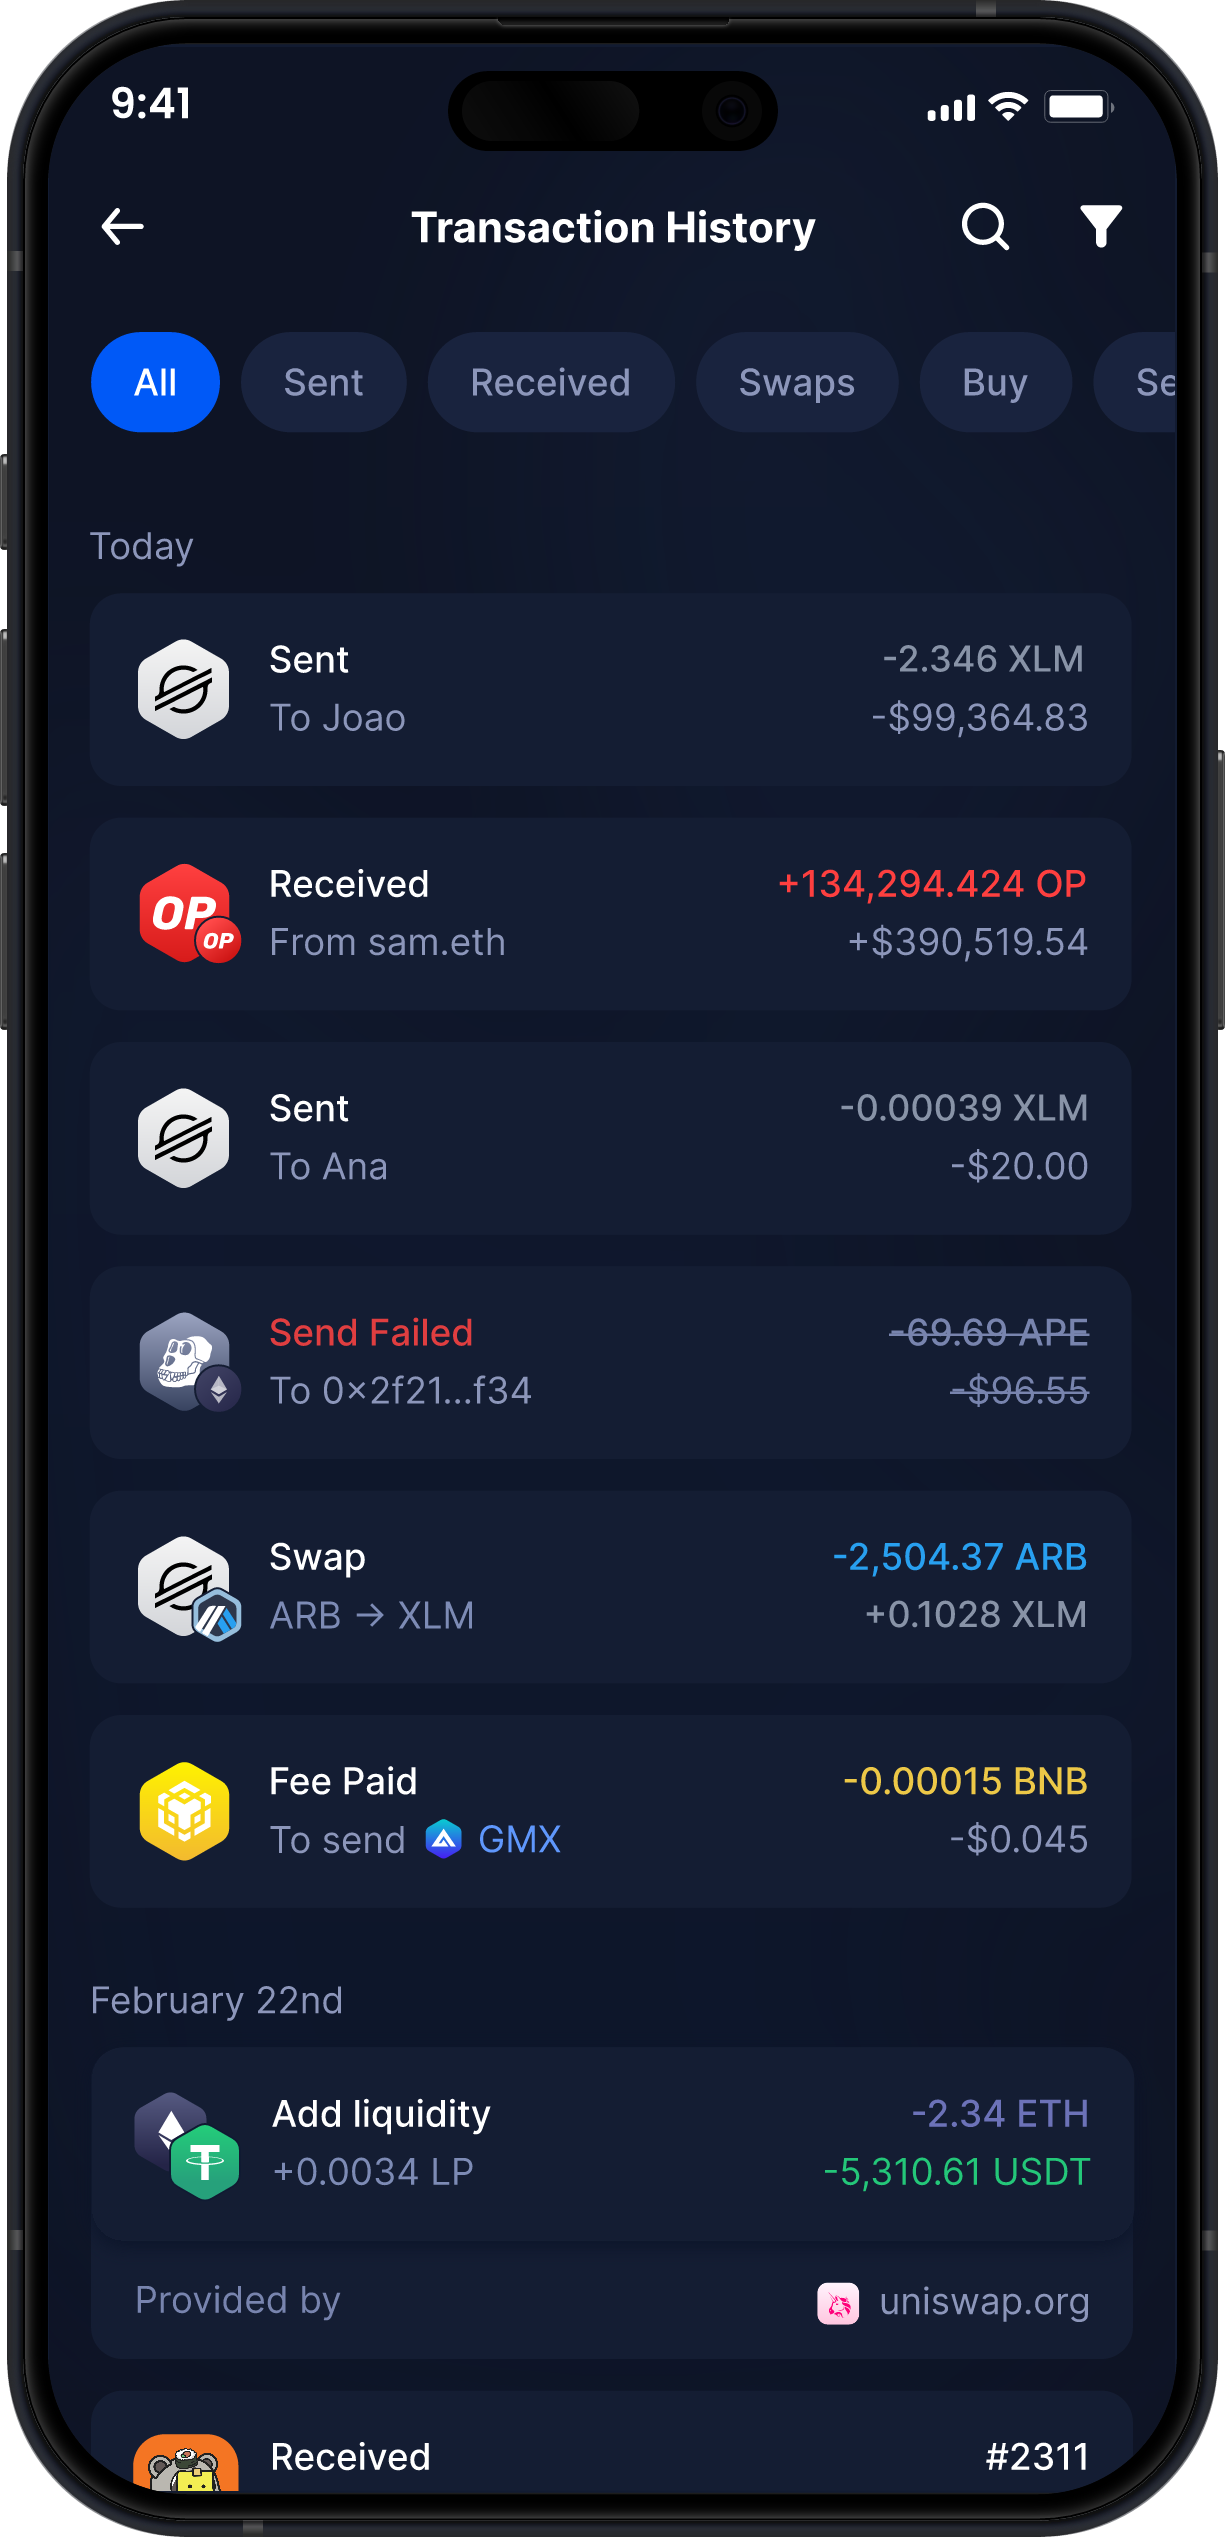 Infinity Mobile Stellar Wallet - Complete XLM Transaction History